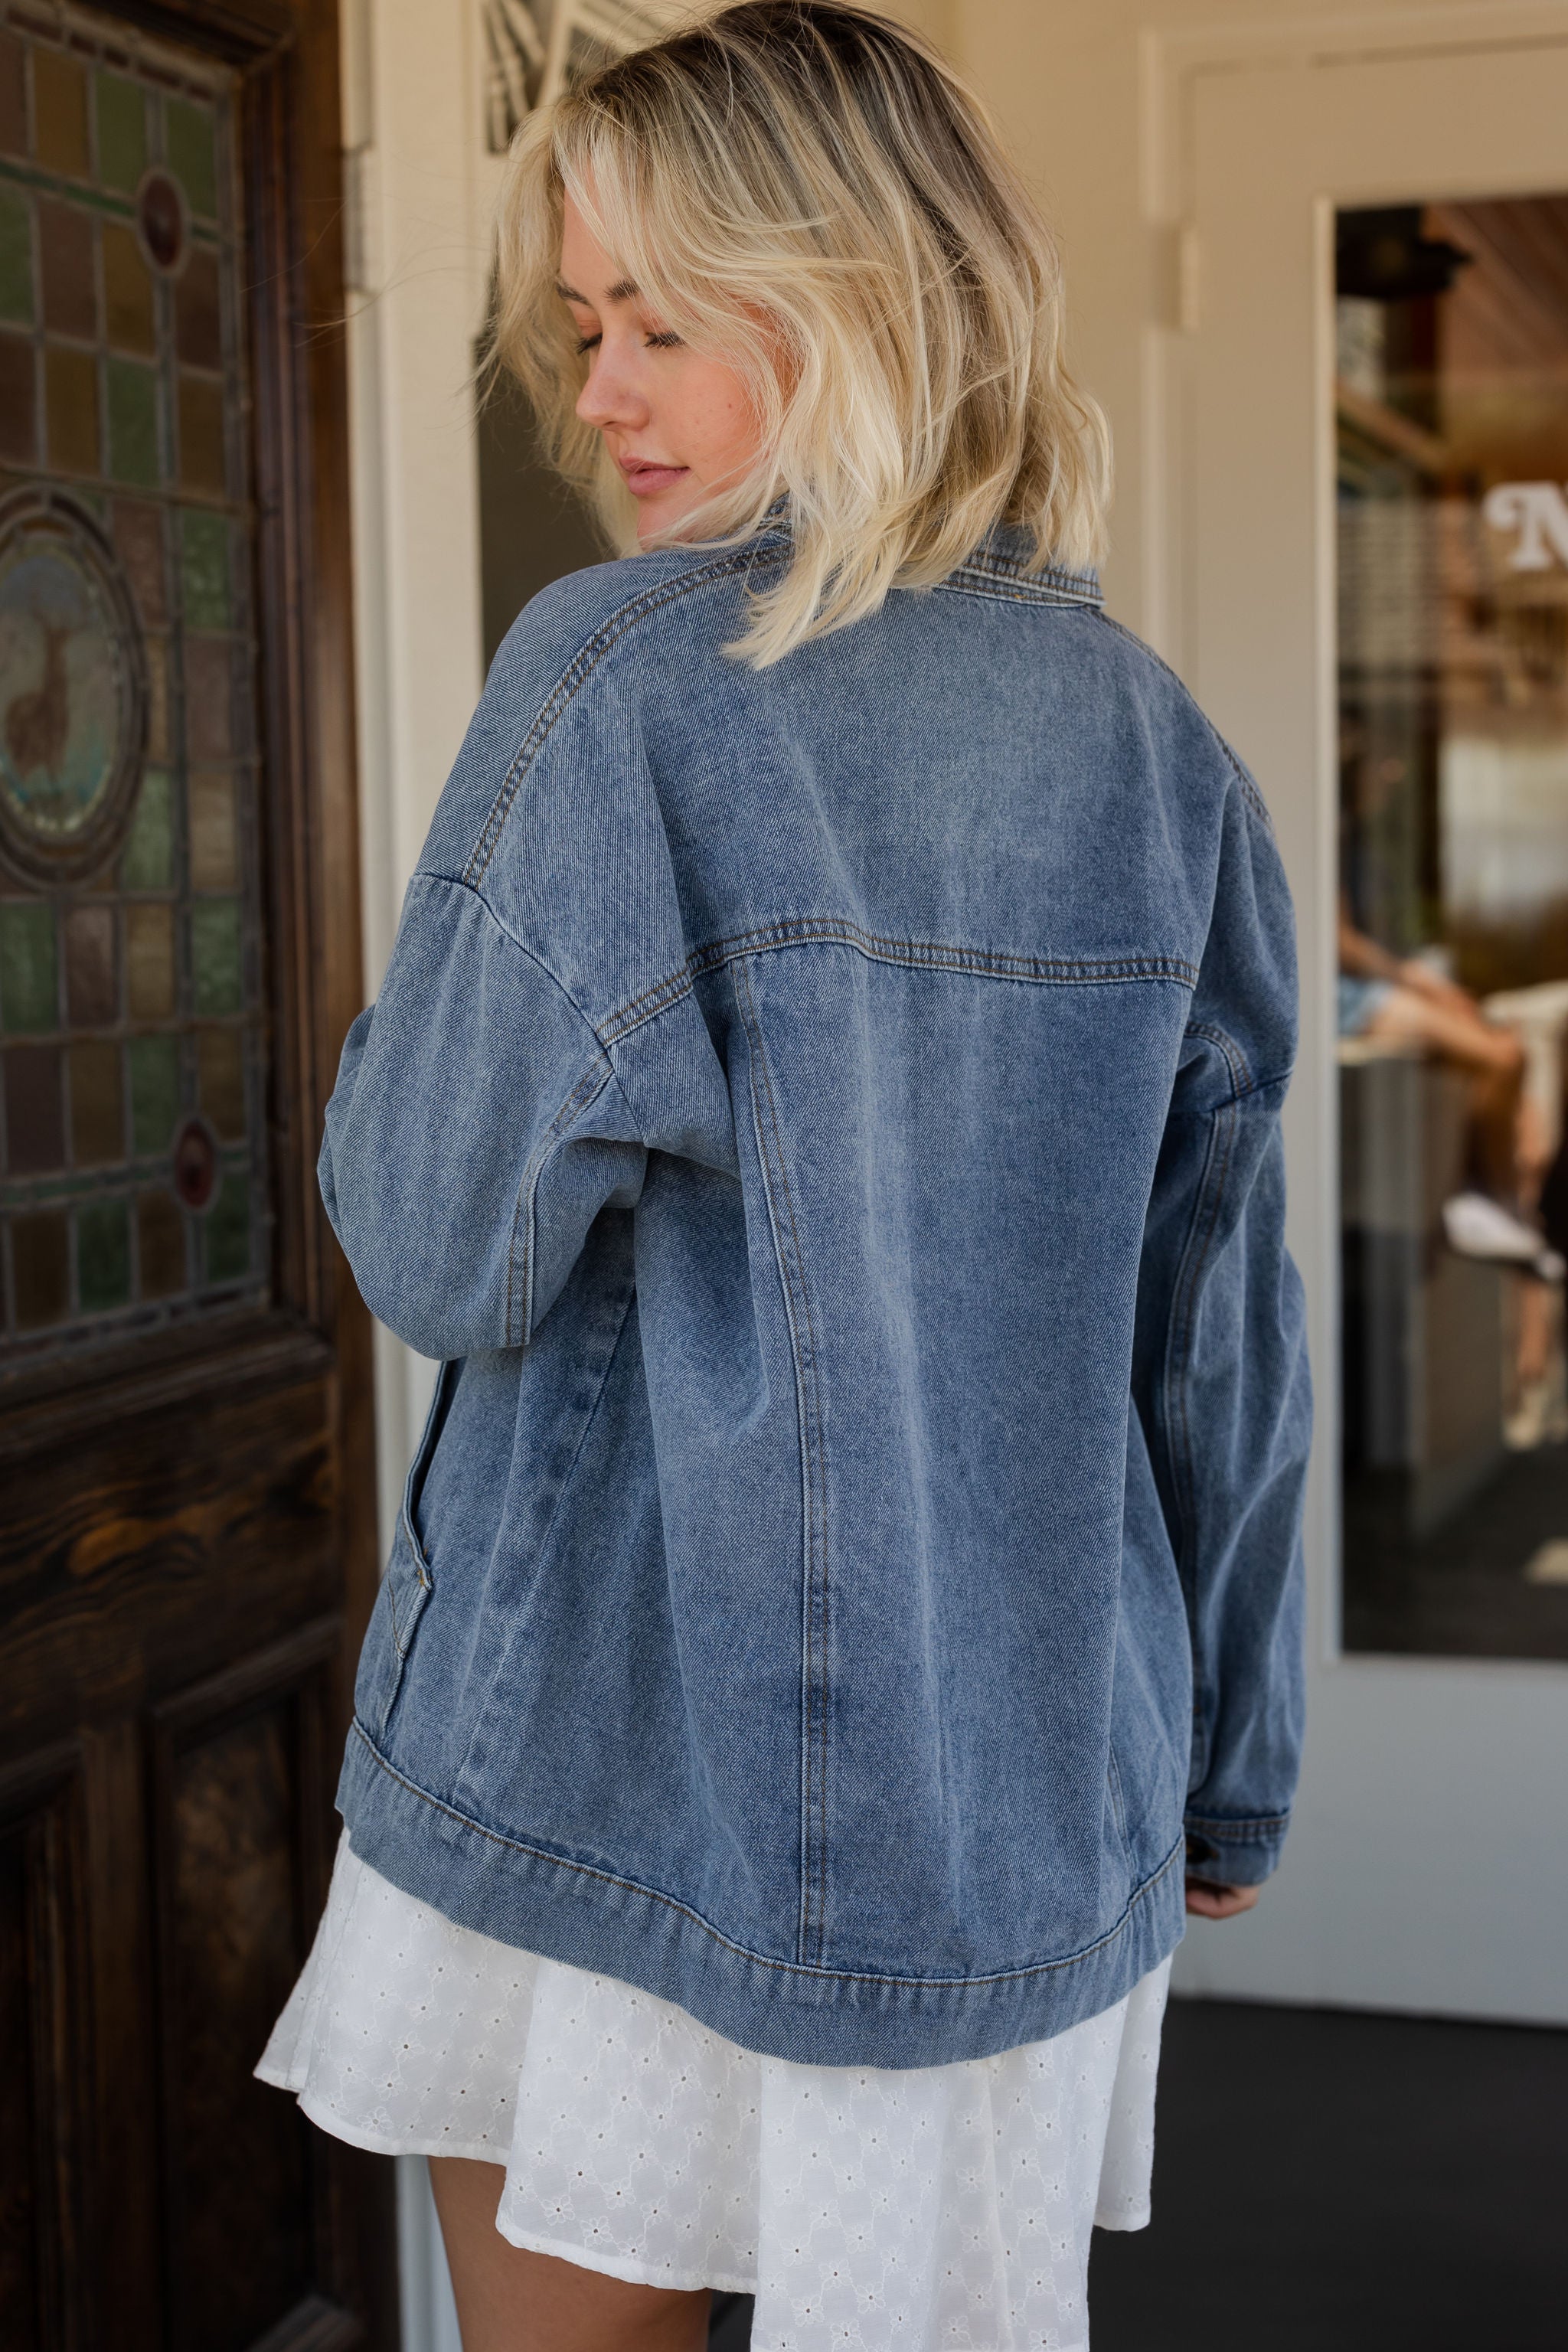 Good Company Denim Jacket by For Good